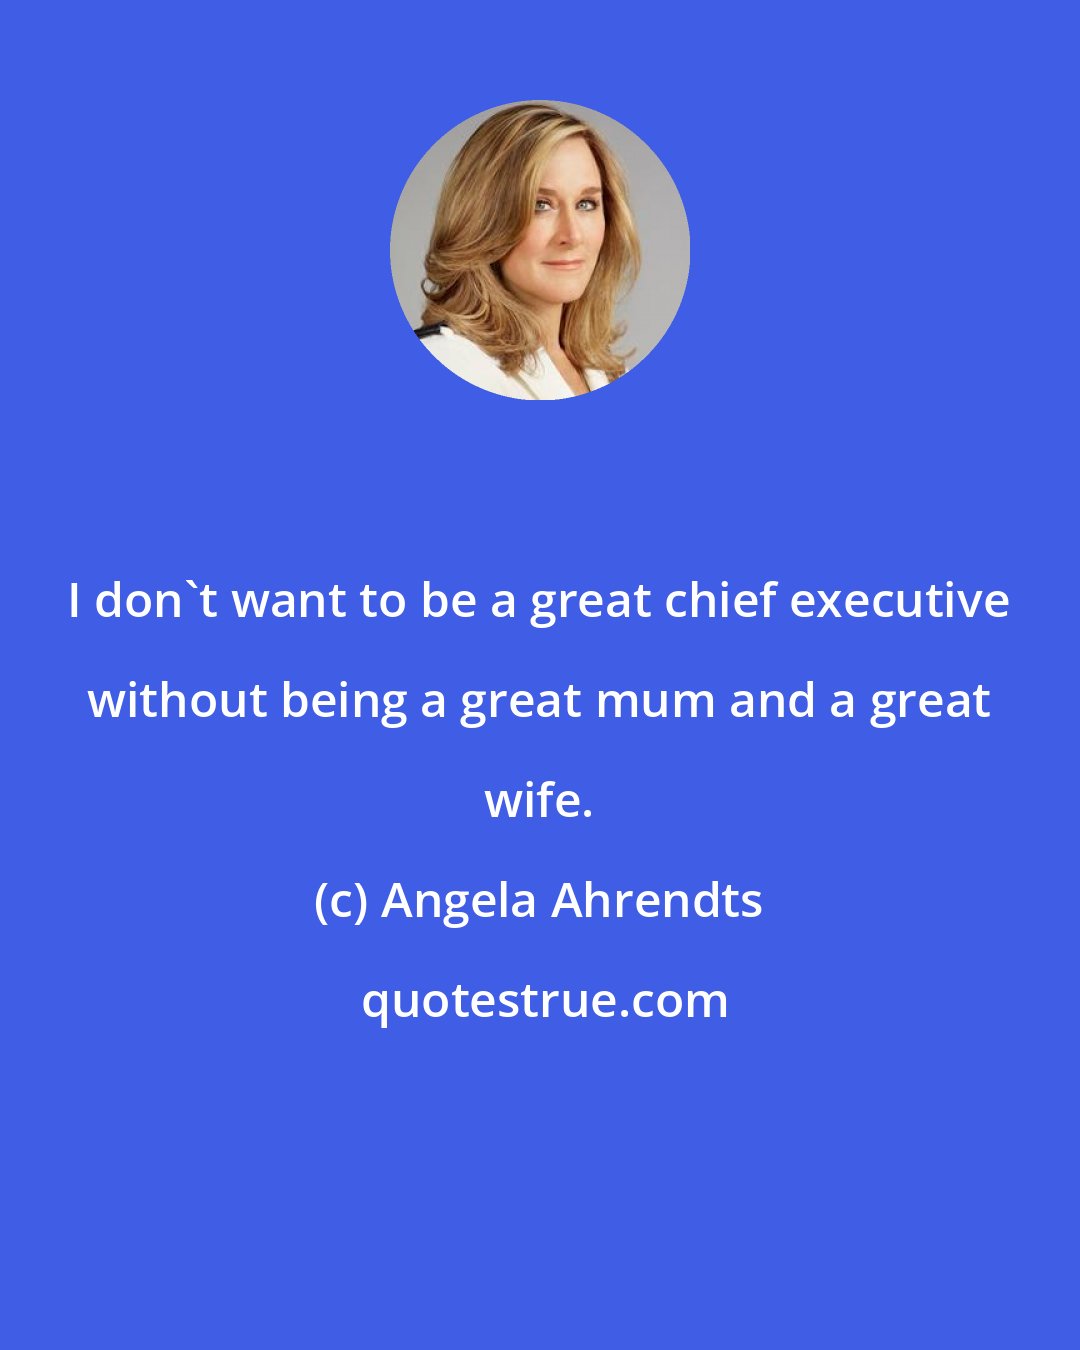 Angela Ahrendts: I don't want to be a great chief executive without being a great mum and a great wife.